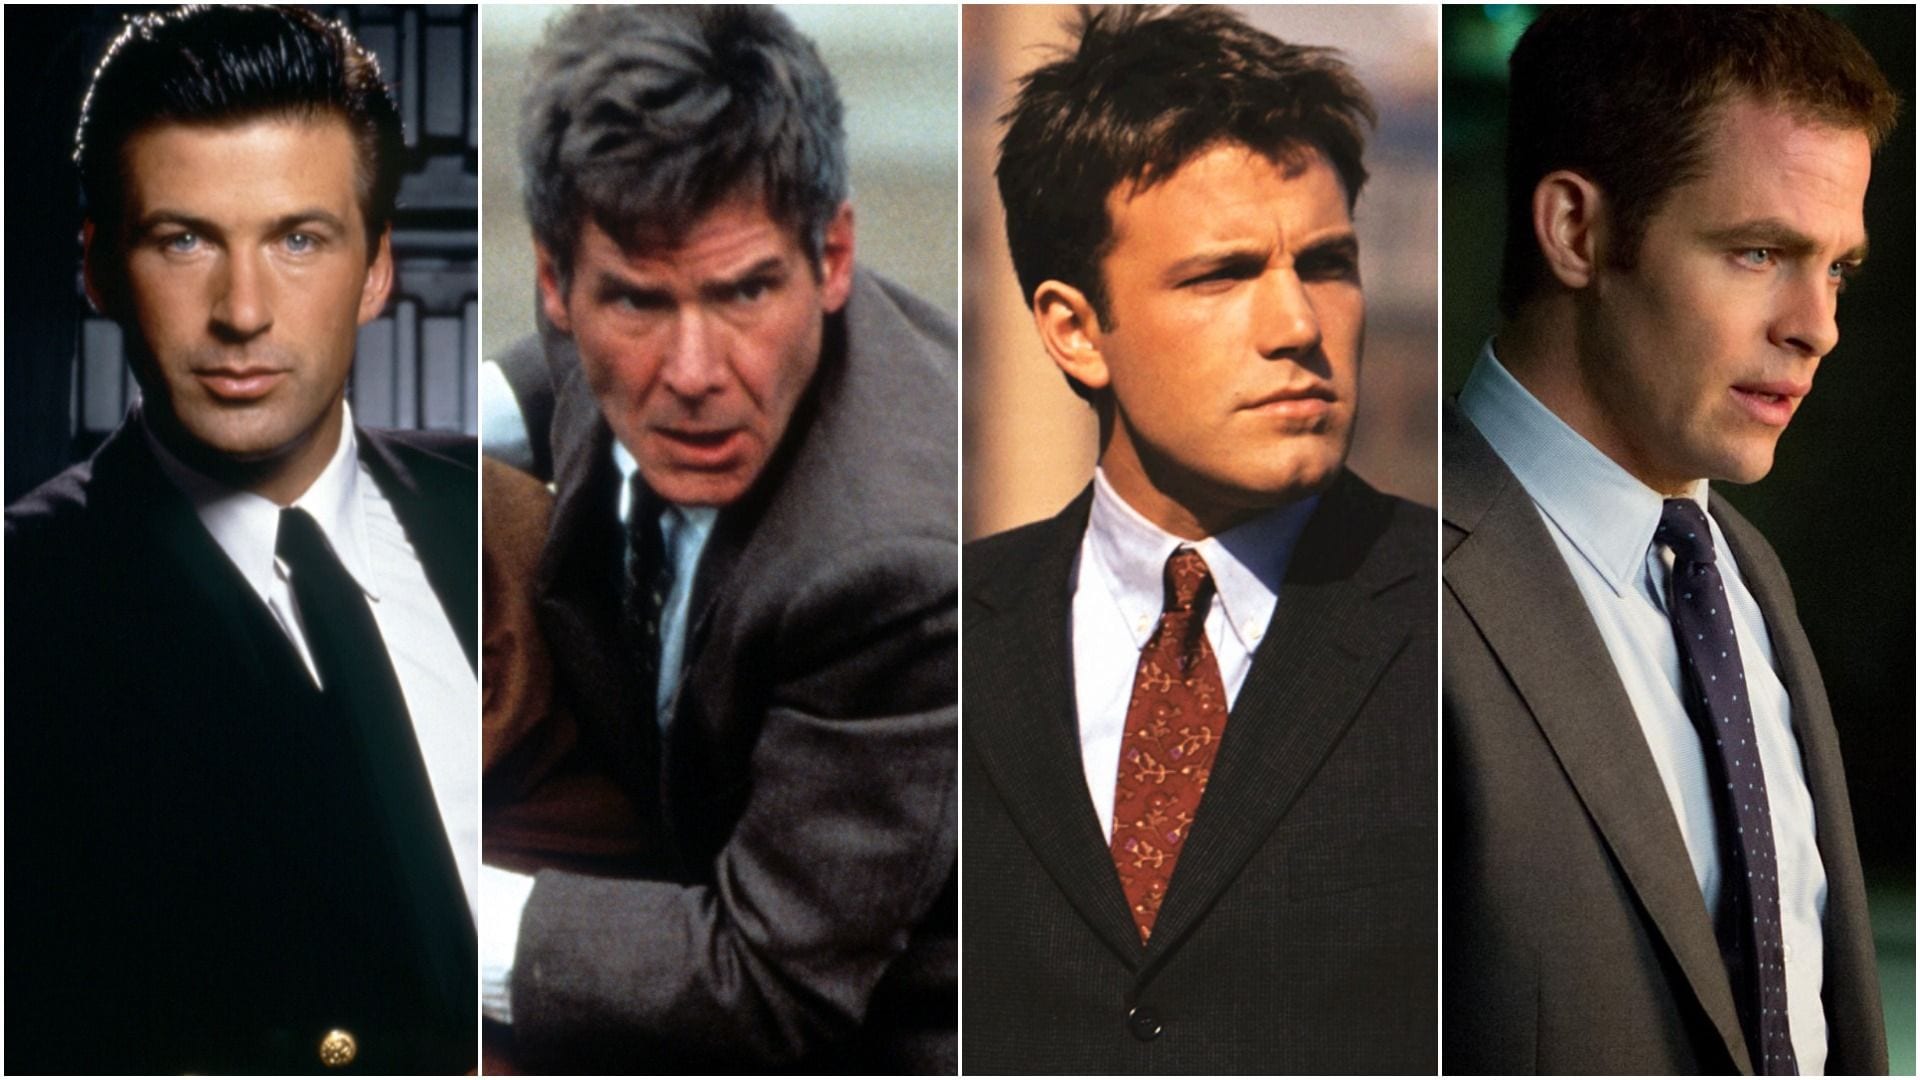 All Jack Ryan Films Ranked: From Best to Worst!